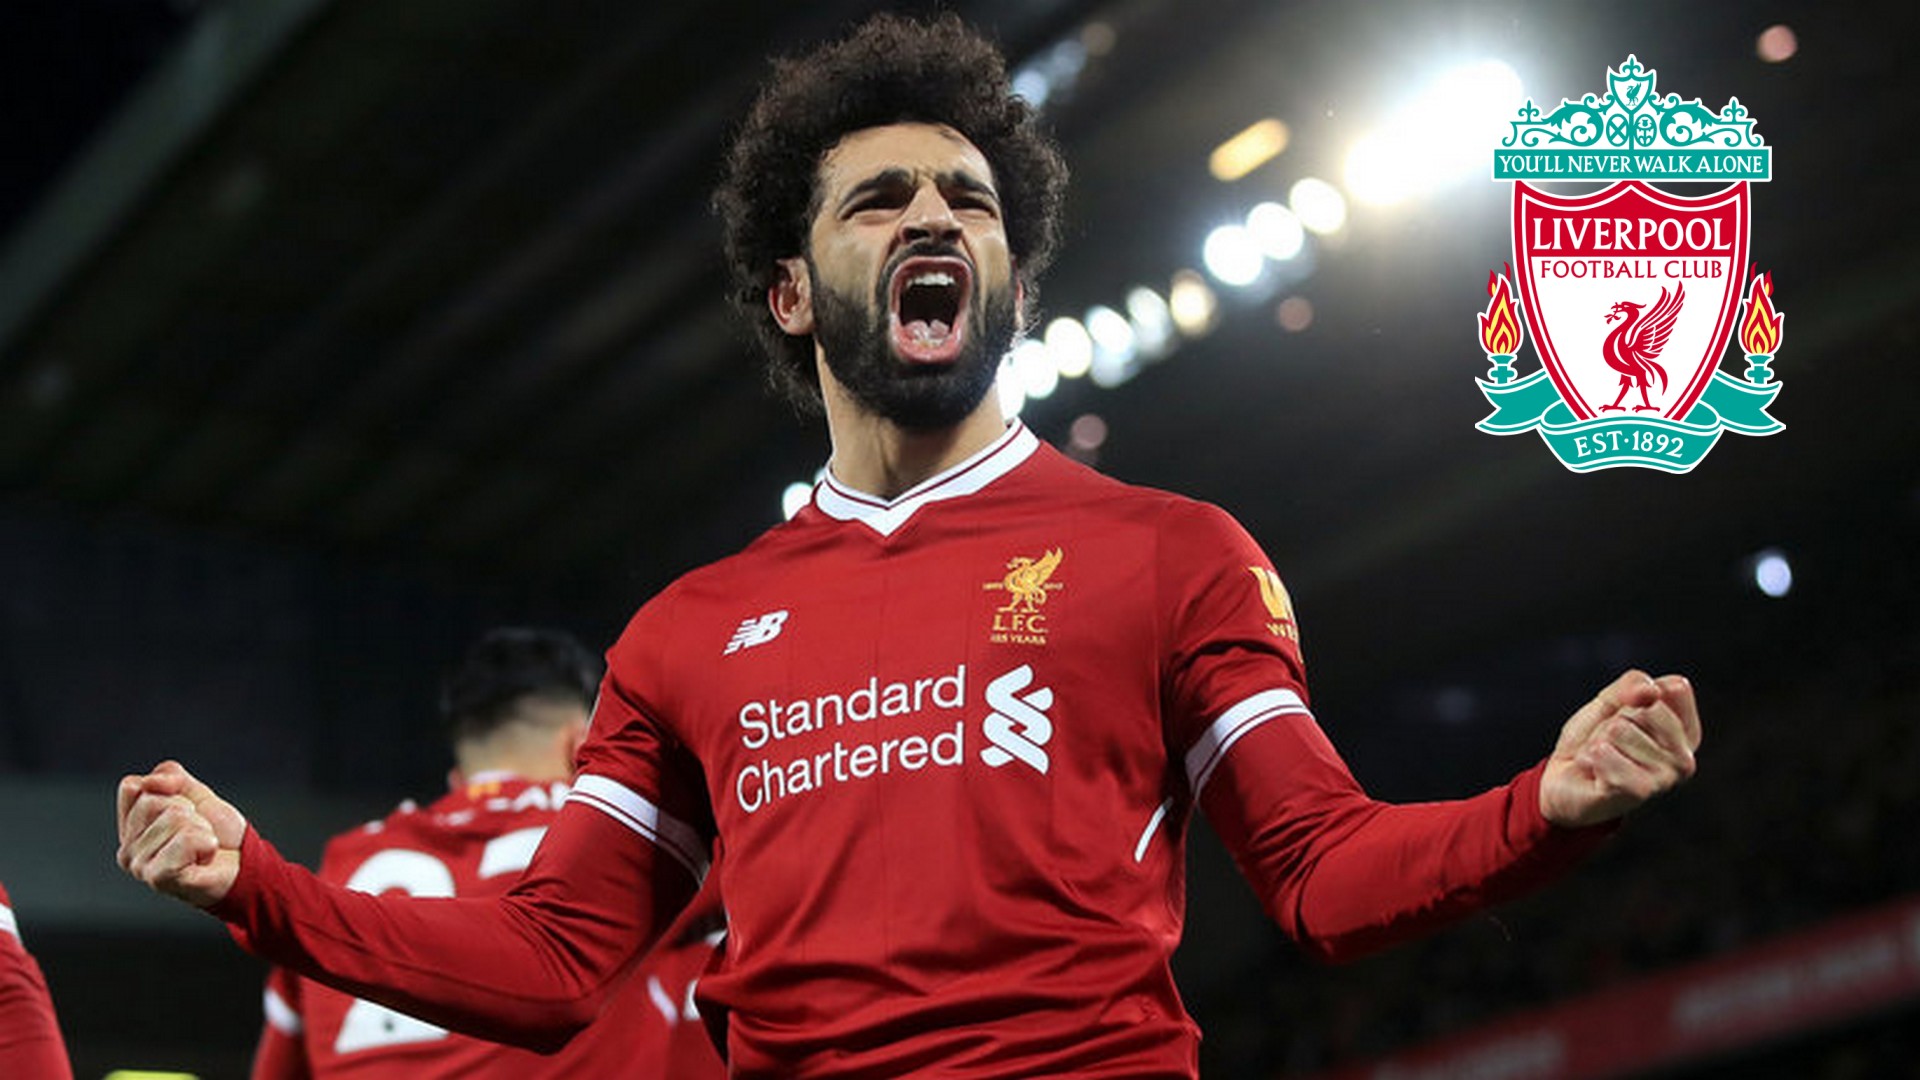 Liverpool Mohamed Salah Wallpaper with resolution 1920X1080 pixel. You can use this wallpaper as background for your desktop Computer Screensavers, Android or iPhone smartphones